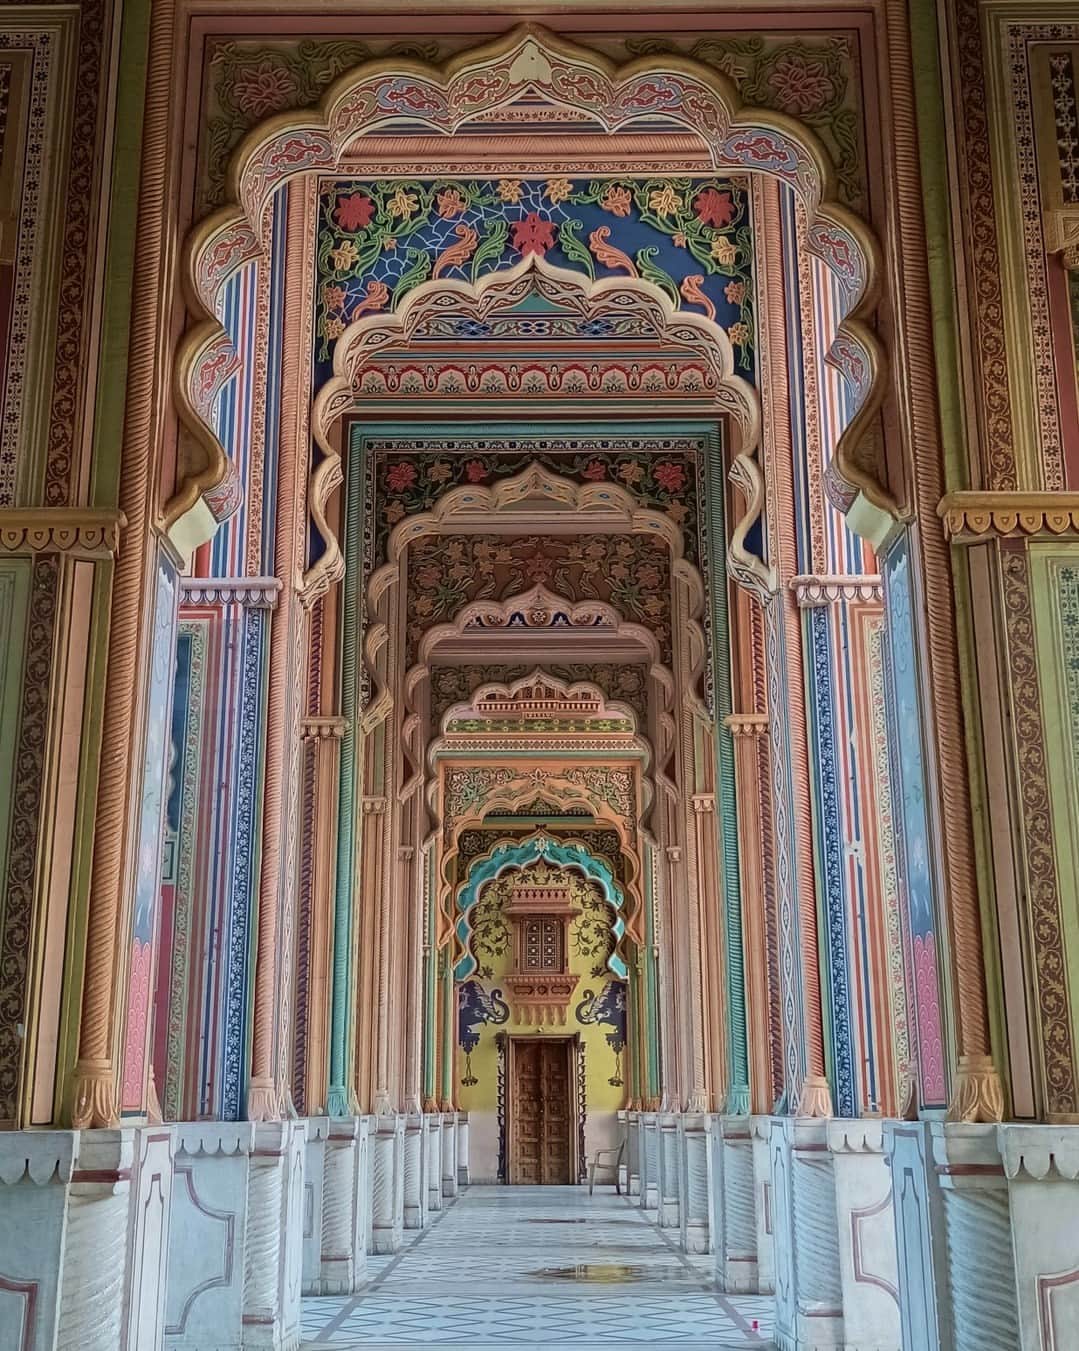 Rosetta Stoneさんのインスタグラム写真 - (Rosetta StoneInstagram)「#Jaipur, also known as the Pink City, is a vibrant and culturally rich city that offers a unique blend of history, art, and architecture. With its magnificent forts, palaces, temples, and colorful bazaars, it is a must-visit destination for anyone traveling to #India.   Here are 6 interesting facts about Jaipur you might not know:  1. Jaipur was founded during the reign of Maharaja Jai Singh on November 18, 1727, and took about four years to complete. Maharaja Jai Singh employed proficient architects in planning the city. Jaipur was the first "planned city" in India.   2. In 1876, the Prince of Wales and Queen Victoria came to visit Jaipur. Maharaja Ram Singh, who ruled Jaipur at the time, decided to welcome his guests by coloring every building in Jaipur pink. In India, pink is traditionally the color associated with hospitality and vibrancy.   3. It is home to 3 forts (Amber Fort, Jaigarh Fort, and Nahargarh Fort) and more than 5 palaces. Hawa Mahal (which means "Palace of Winds") is a unique tower palace in Jaipur. The palace has 953 windows, which allows the wind to blow inside and keep it cool. Jal Mahal is another popular palace, which is located in the middle of the Man Sagar Lake and is more than half-submerged in water. At first glimpse, it gives you the illusion that it is floating atop the lake.   4. Jaipur has many famous temples. One of these is renowned due to its monkeys. The Galtaji Monkey Temple is built in a forested and hilly region 10 km from Jaipur, and a water spring flows from the top of the hill and collects in seven pools around the temple. It makes the entire temple a very calm, peaceful, and relaxing tourist spot.  5. Jaipur is one of the largest producers of gemstones in the world, particularly of high-quality colored stones such as emeralds, rubies, and sapphires. The Johari Bazaar is a popular destination for buying gemstone jewelry.   6. Jaipur hosts the world's largest free literary fest (named Jaipur Literature Festival) every January. It is attended by poets, authors, artists, and literary giants from all over the world.   Would you like to visit Jaipur?」11月9日 0時55分 - rosettastone